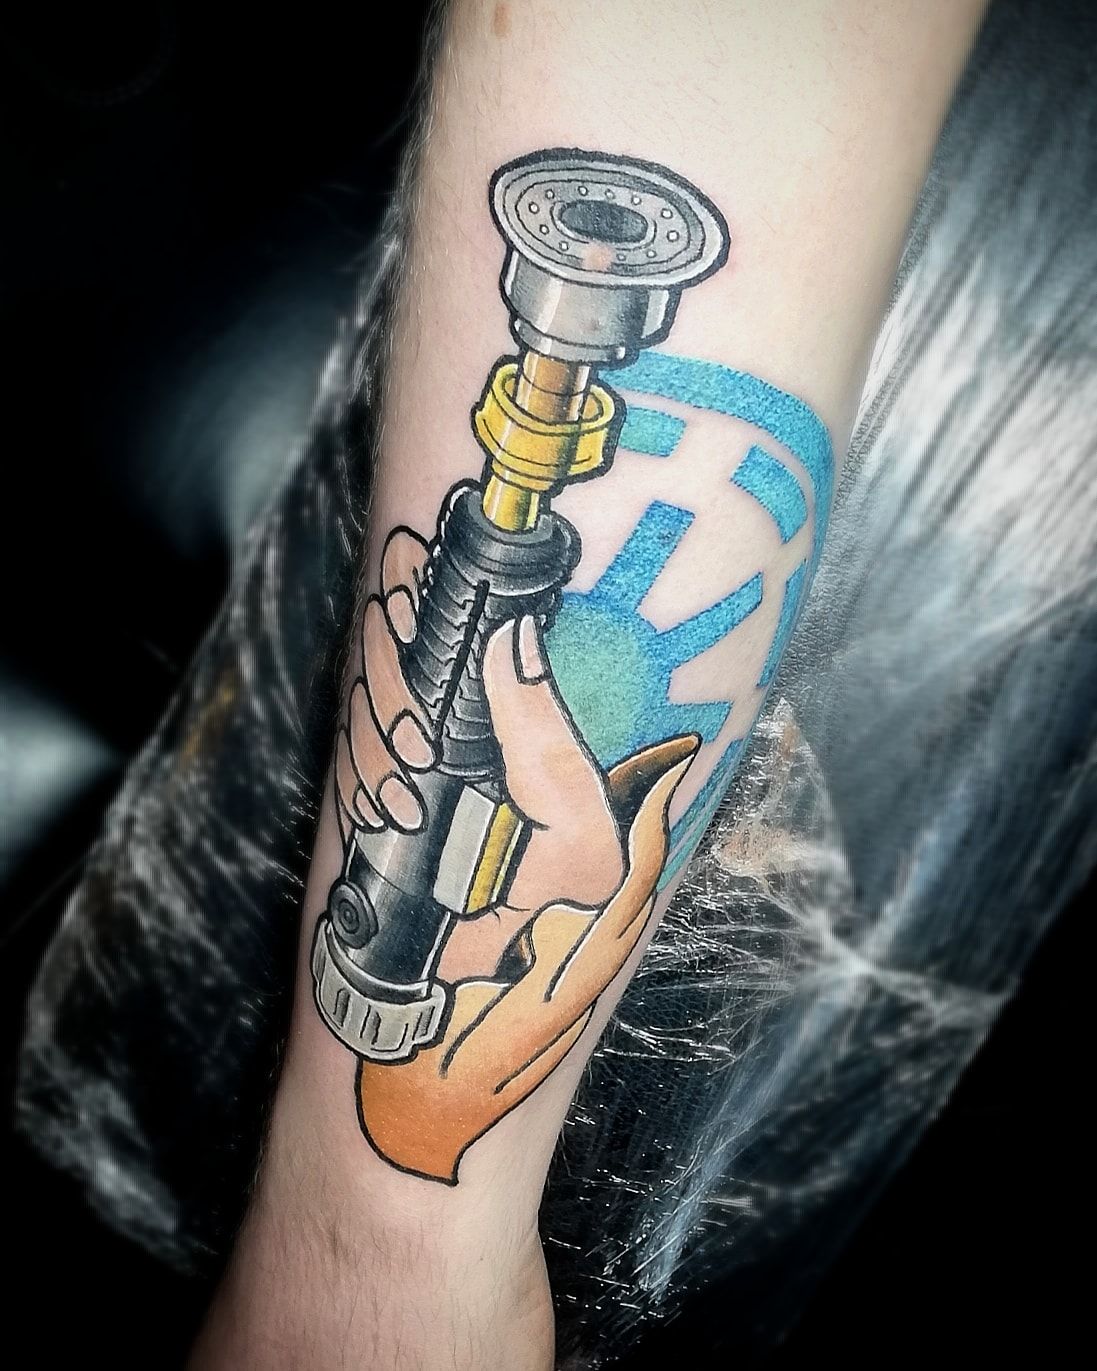 Obi wan lightsaber I did today Been tattooing for a year now Padda  OConnor two tone tattoo co Fleet Hampshire UK  skezytattoos on ig   rTattooApprentice